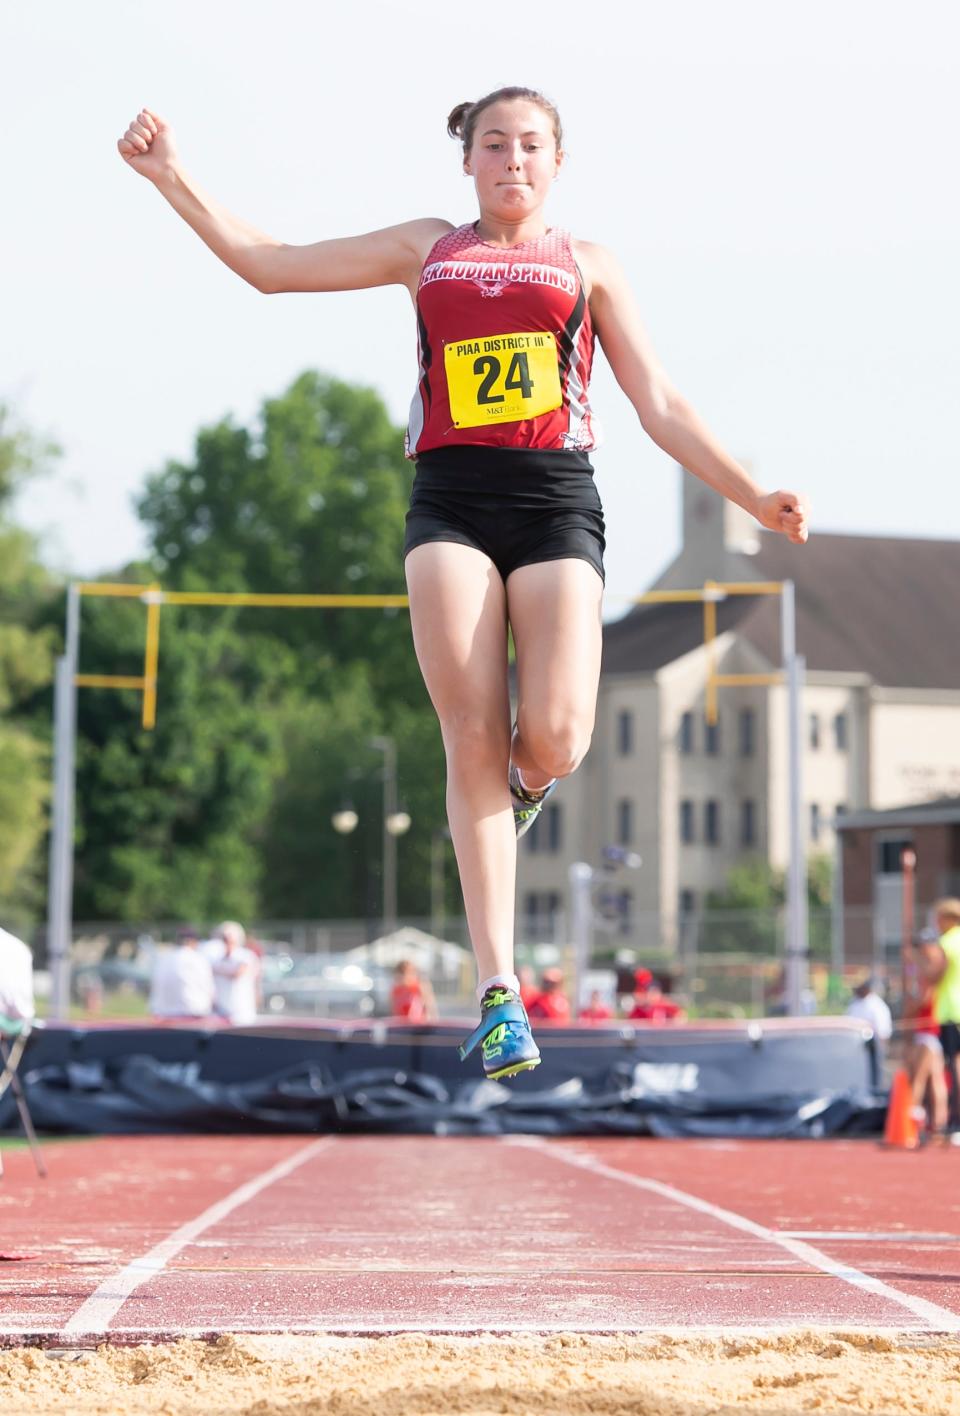 Bermudian Springs' Alison Watts competes in the 2A long jump at the PIAA District 3 Track and Field Championships on Friday, May 20, 2022, at Shippensburg University. Watts medaled in fourth place with a jump of 16-4.